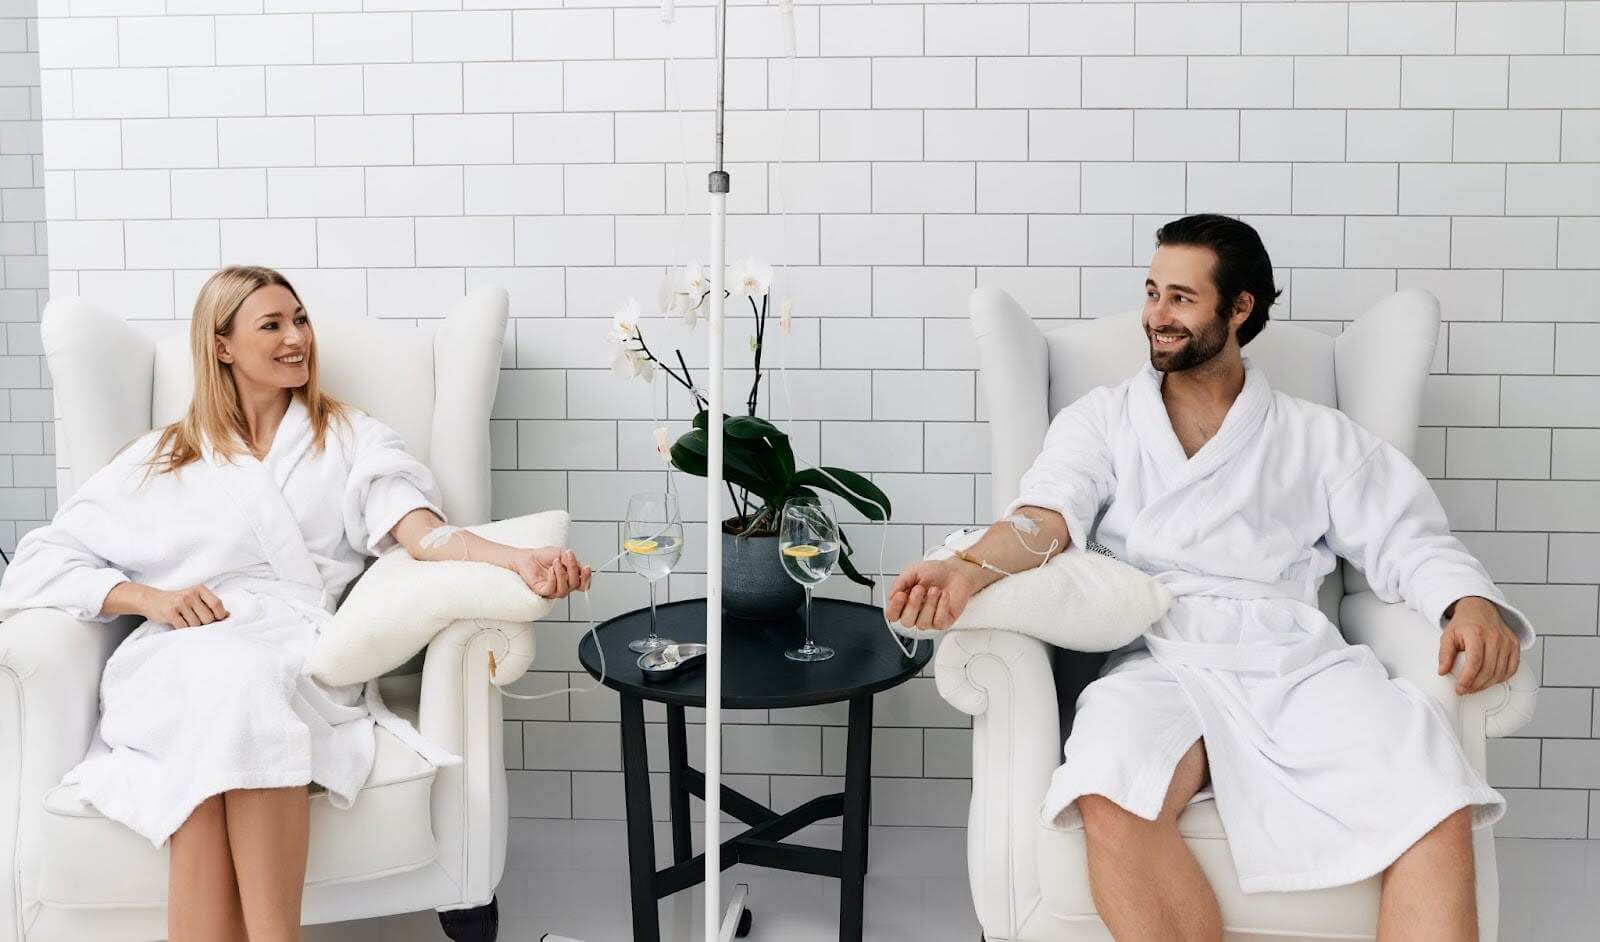 A smiling couple in matching white robes exchanges glances while they sit and receive vitamin IV therapy